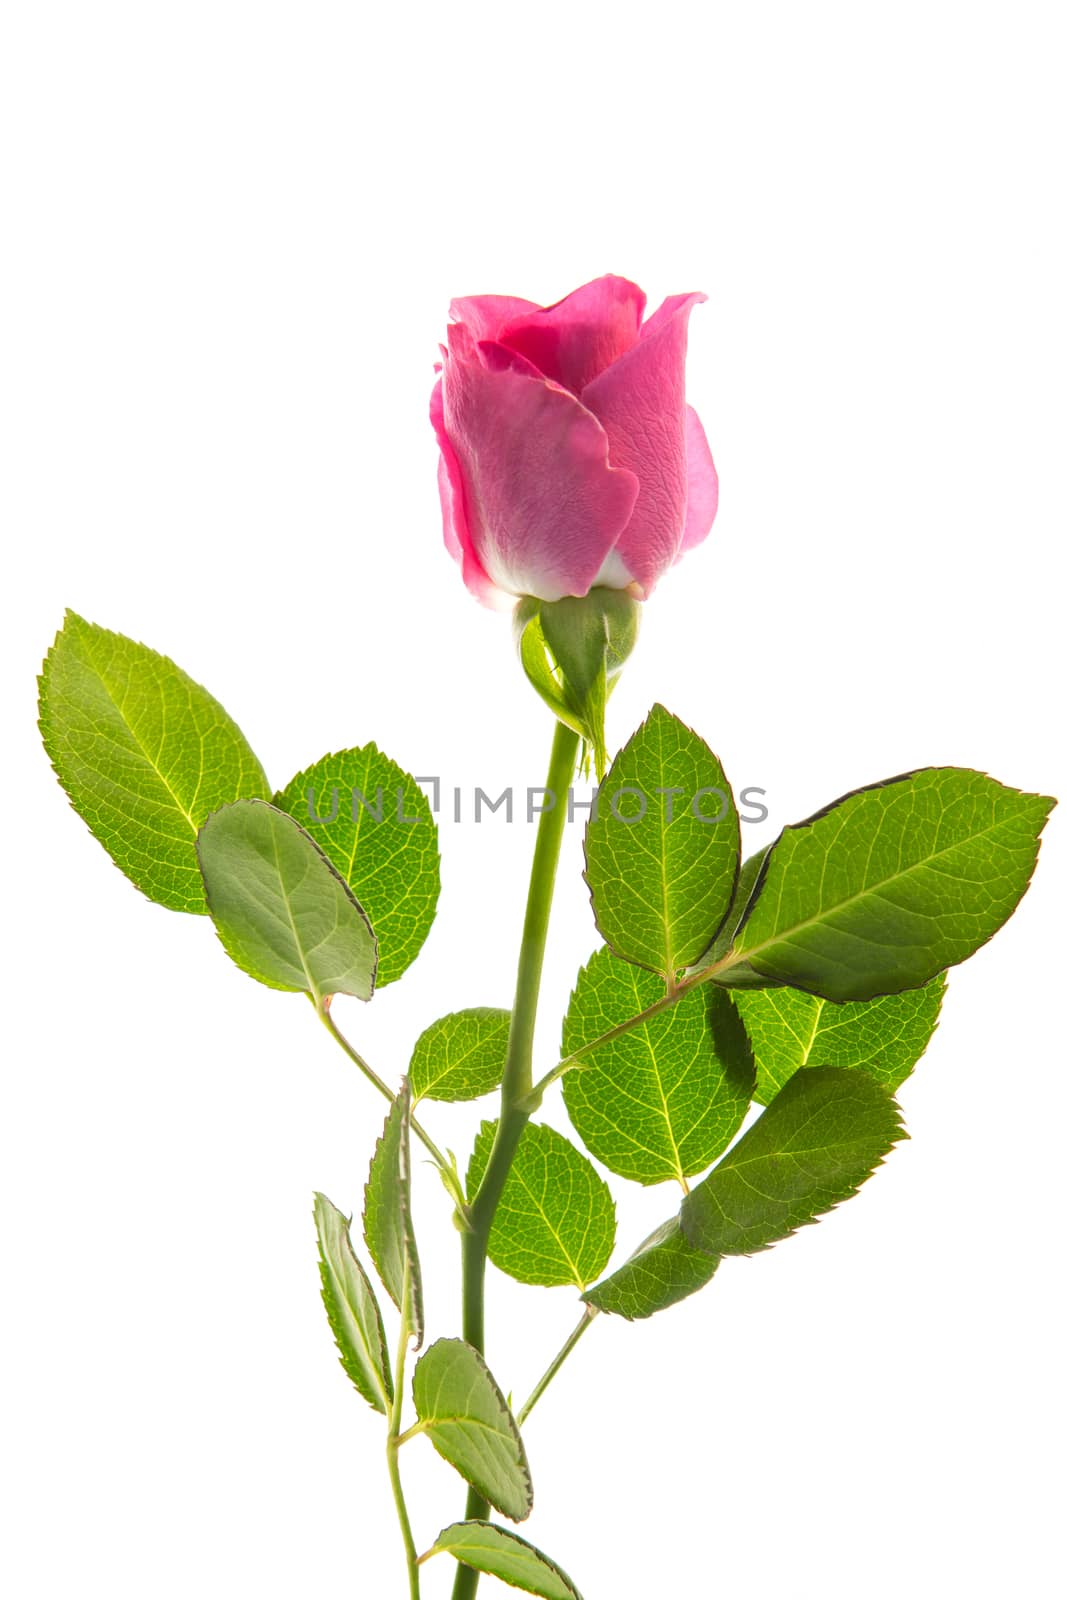 Pink rose in bloom with stalk and leaves on white background